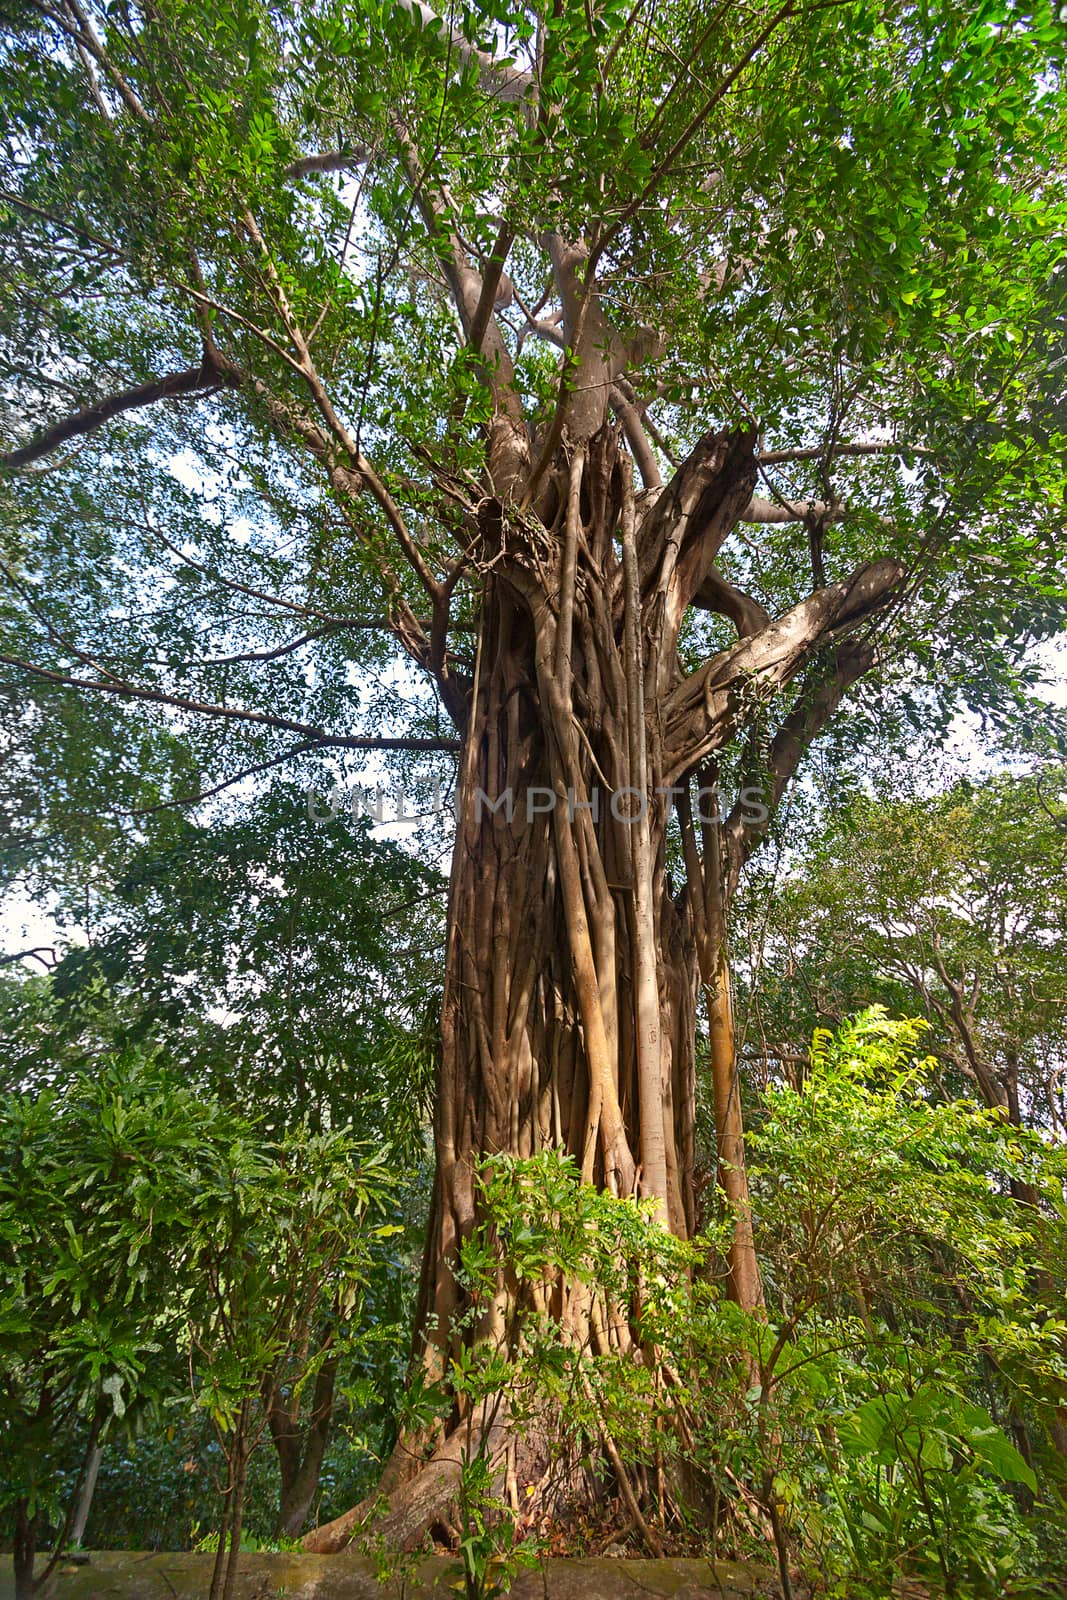 Gigantic Ficus benghalensis in  tropical forest, Thailand.